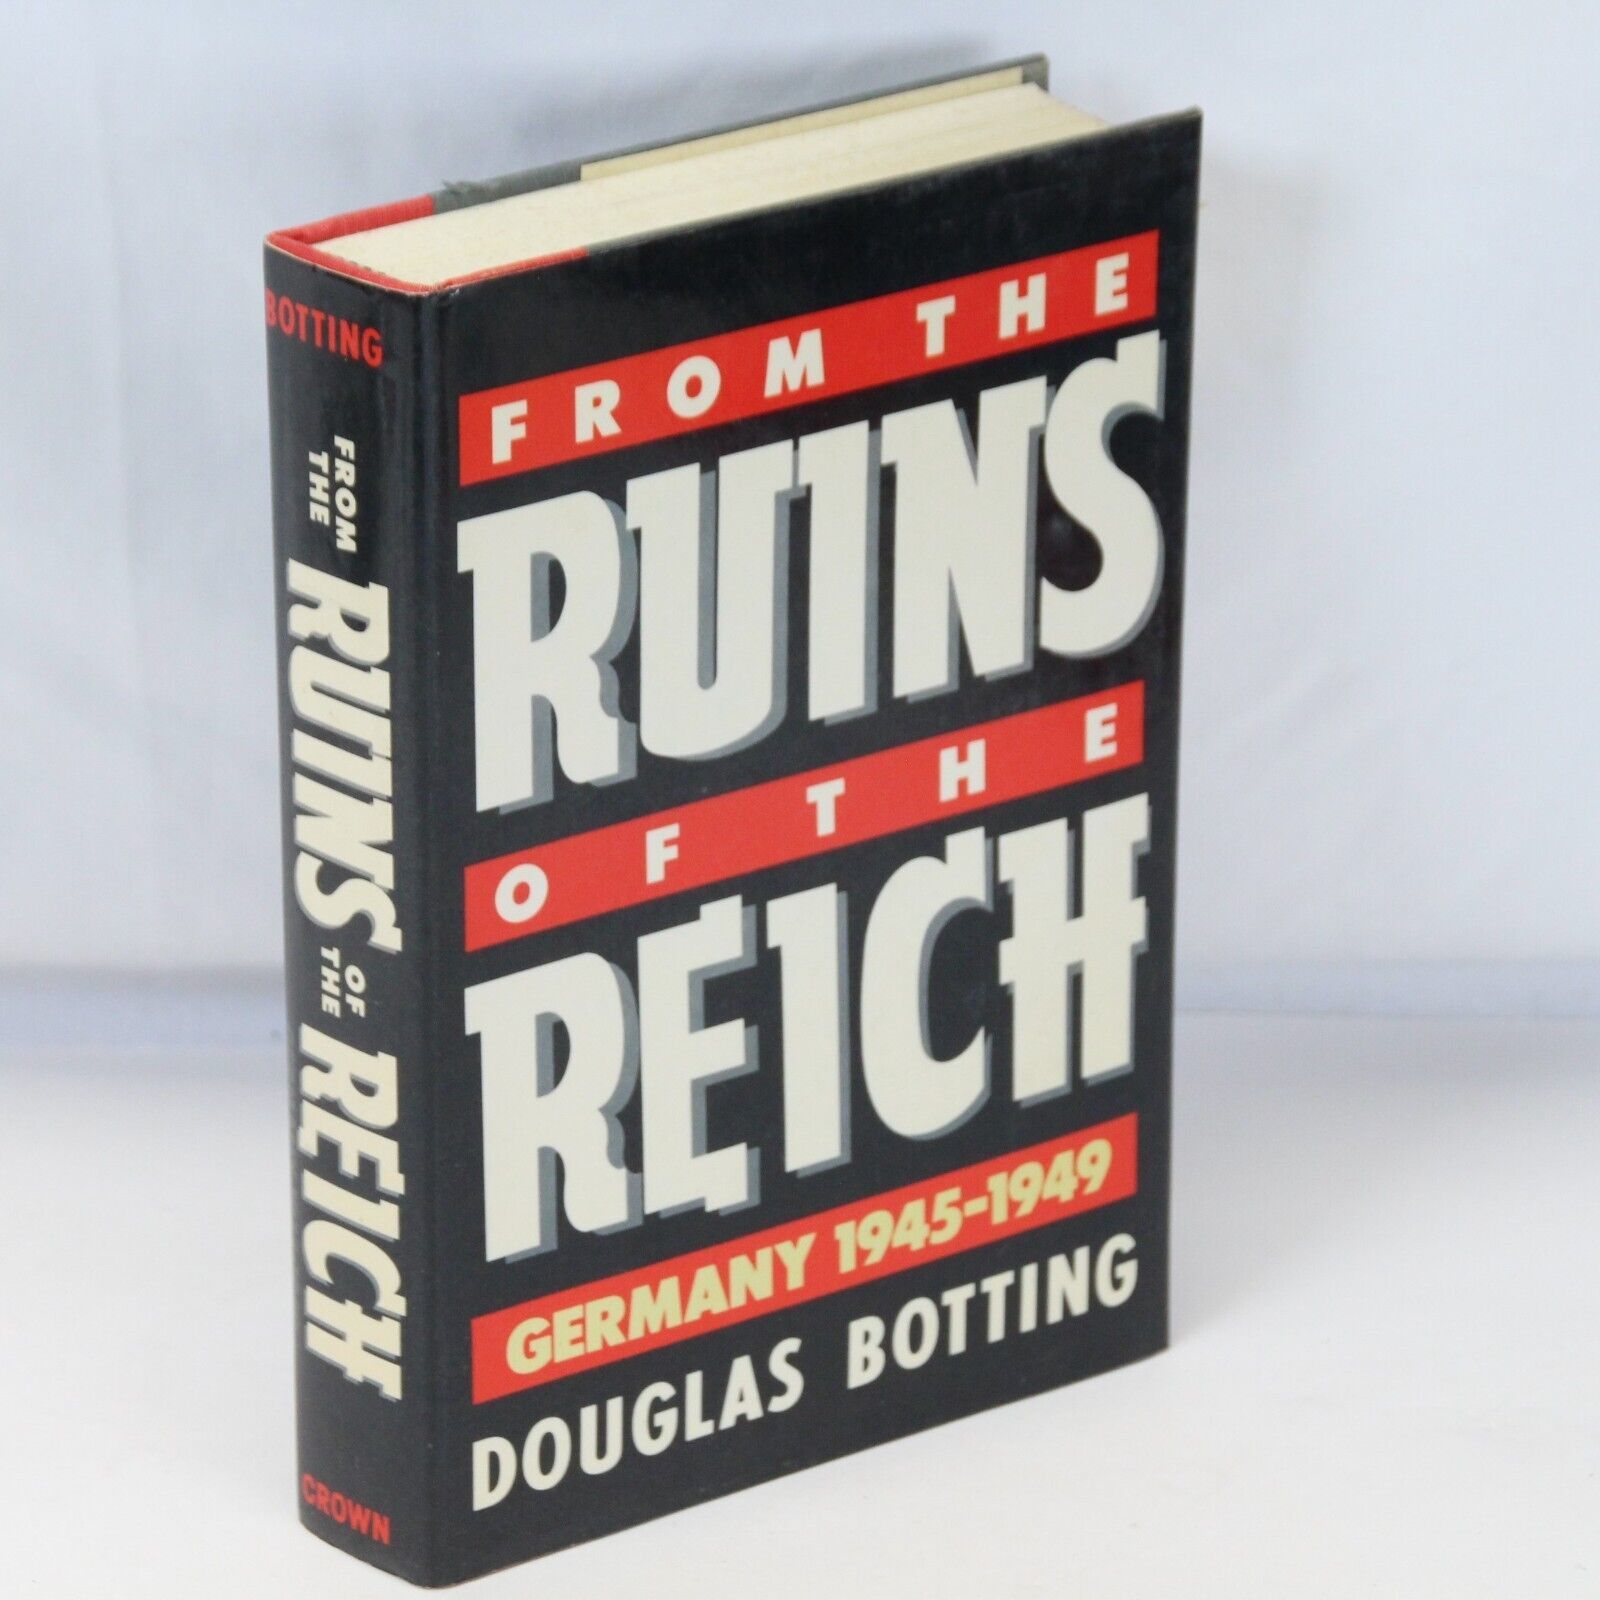 Primary image for From the Ruins of the Reich Germany 1945-1949 Douglas Botting Book 1st Edition